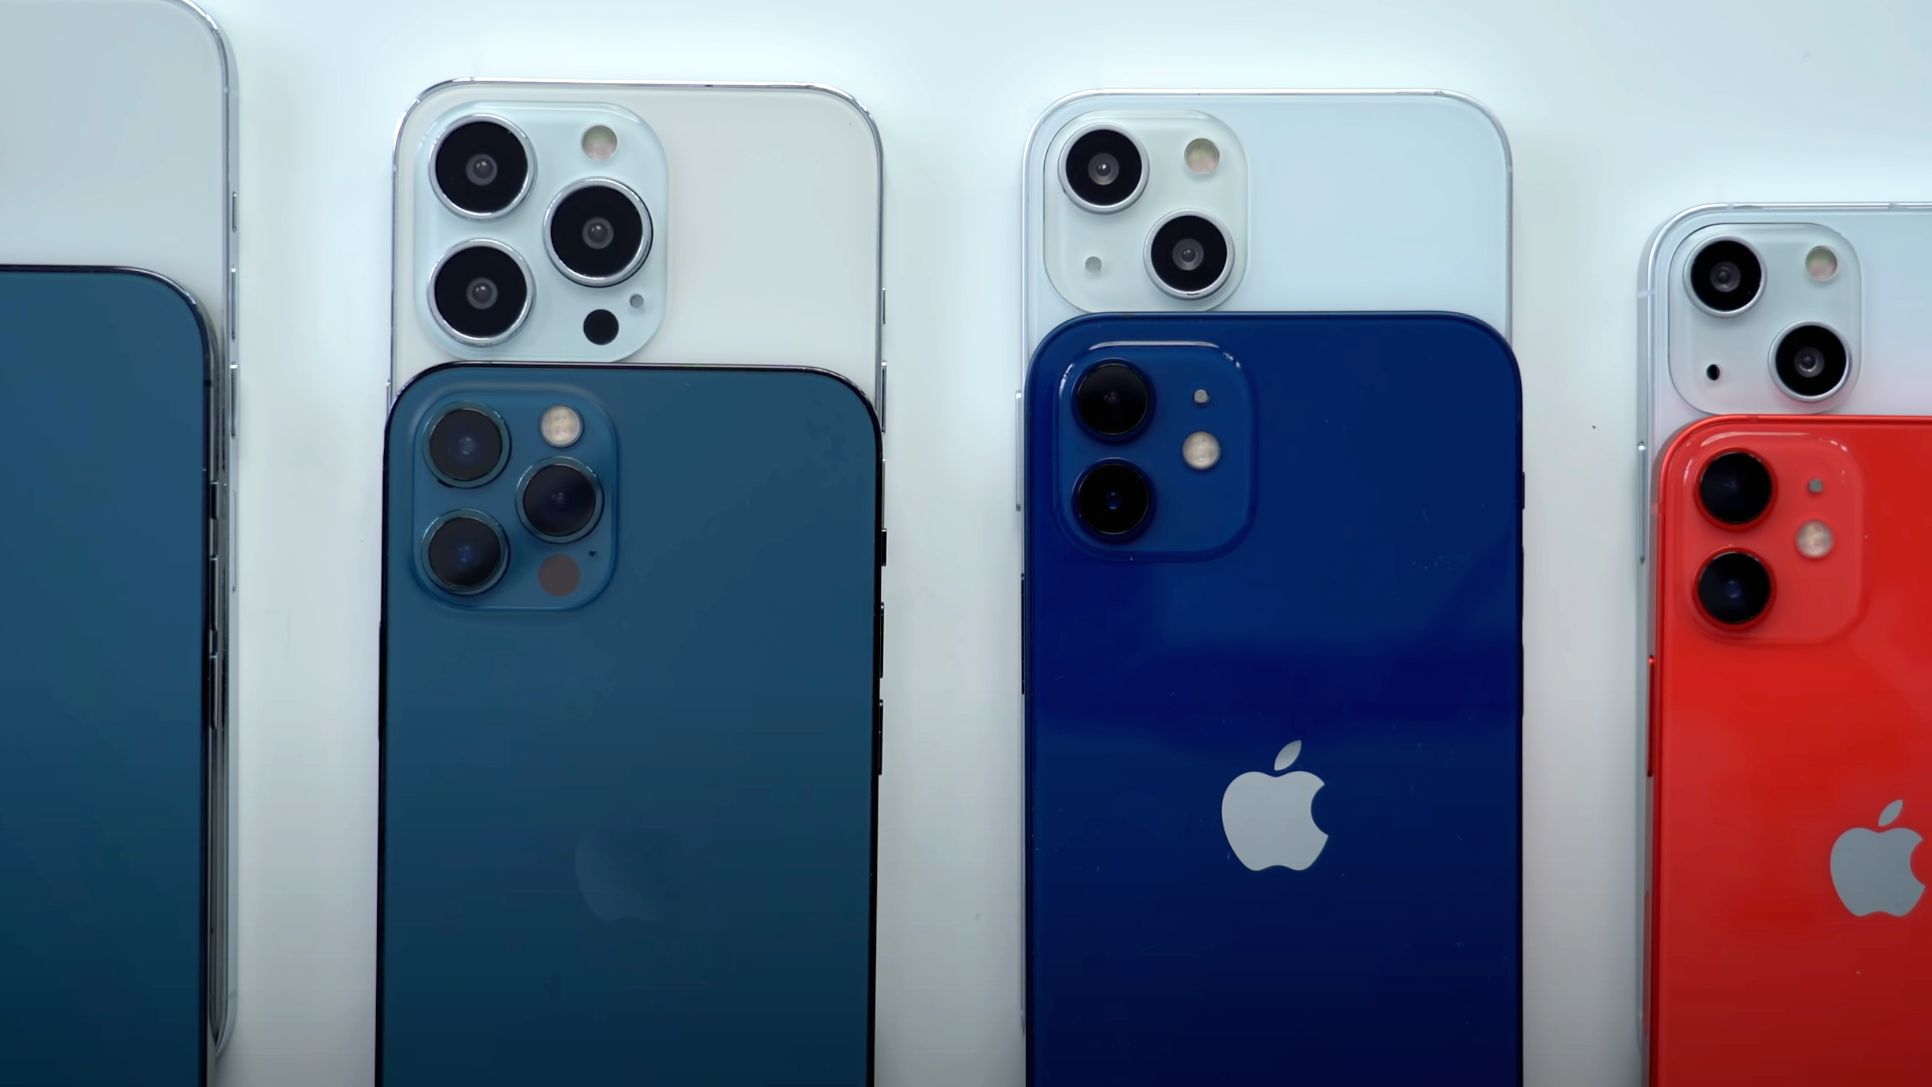 The iPhone 13's camera arrangement will be slightly different than that of the iPhone 12. - Flaregate: Would an Apple-Zeiss iPhone 14 fix the biggest iPhone 12 camera problem, if iPhone 13 doesn't?